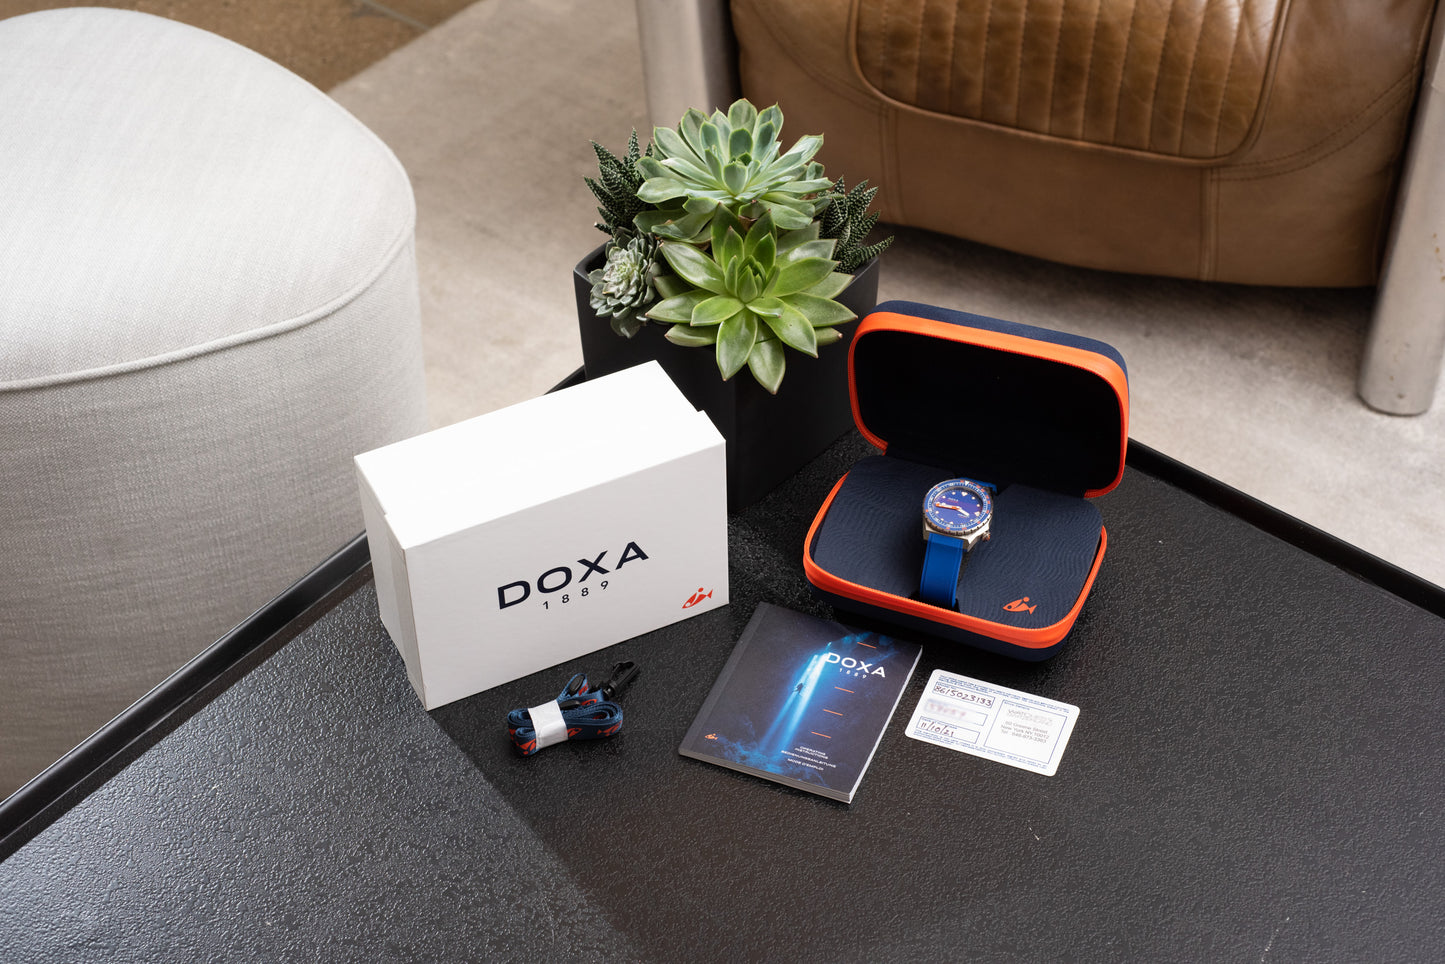 DOXA Sub 600T 'Pacific' Limited Edition